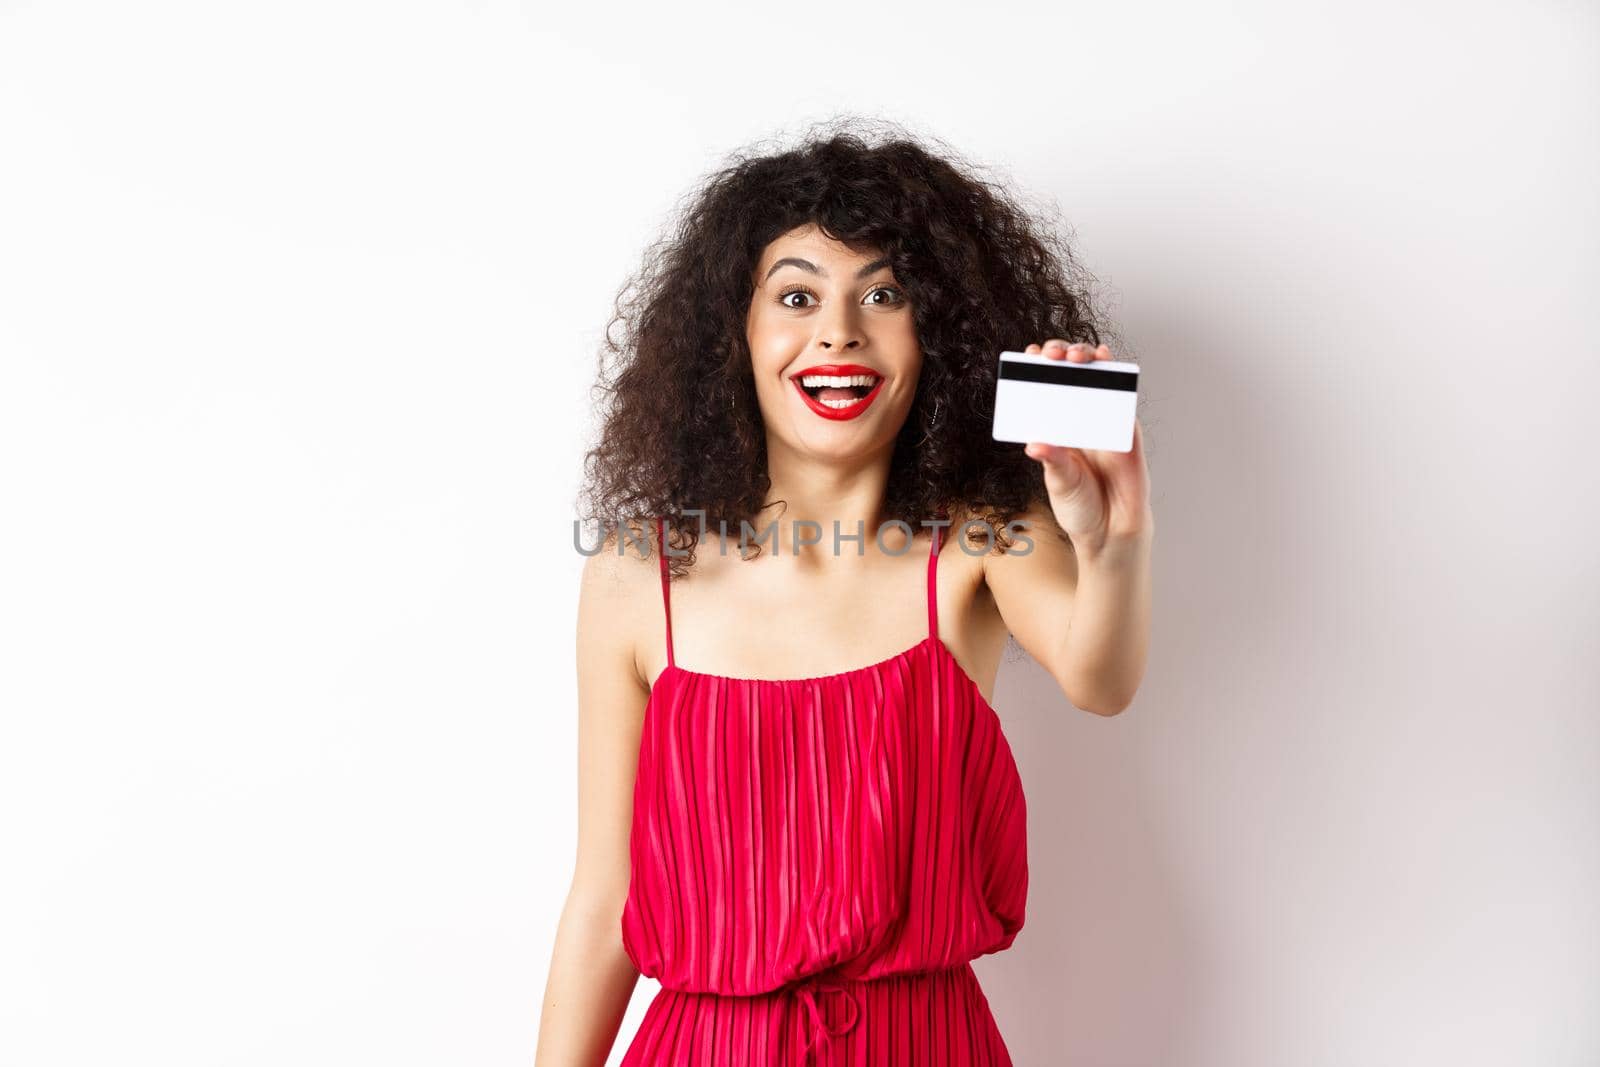 Shopping. Excited stylish lady with makeup, red dress, showing plastic credit card and smiling amazed, standing against white background.